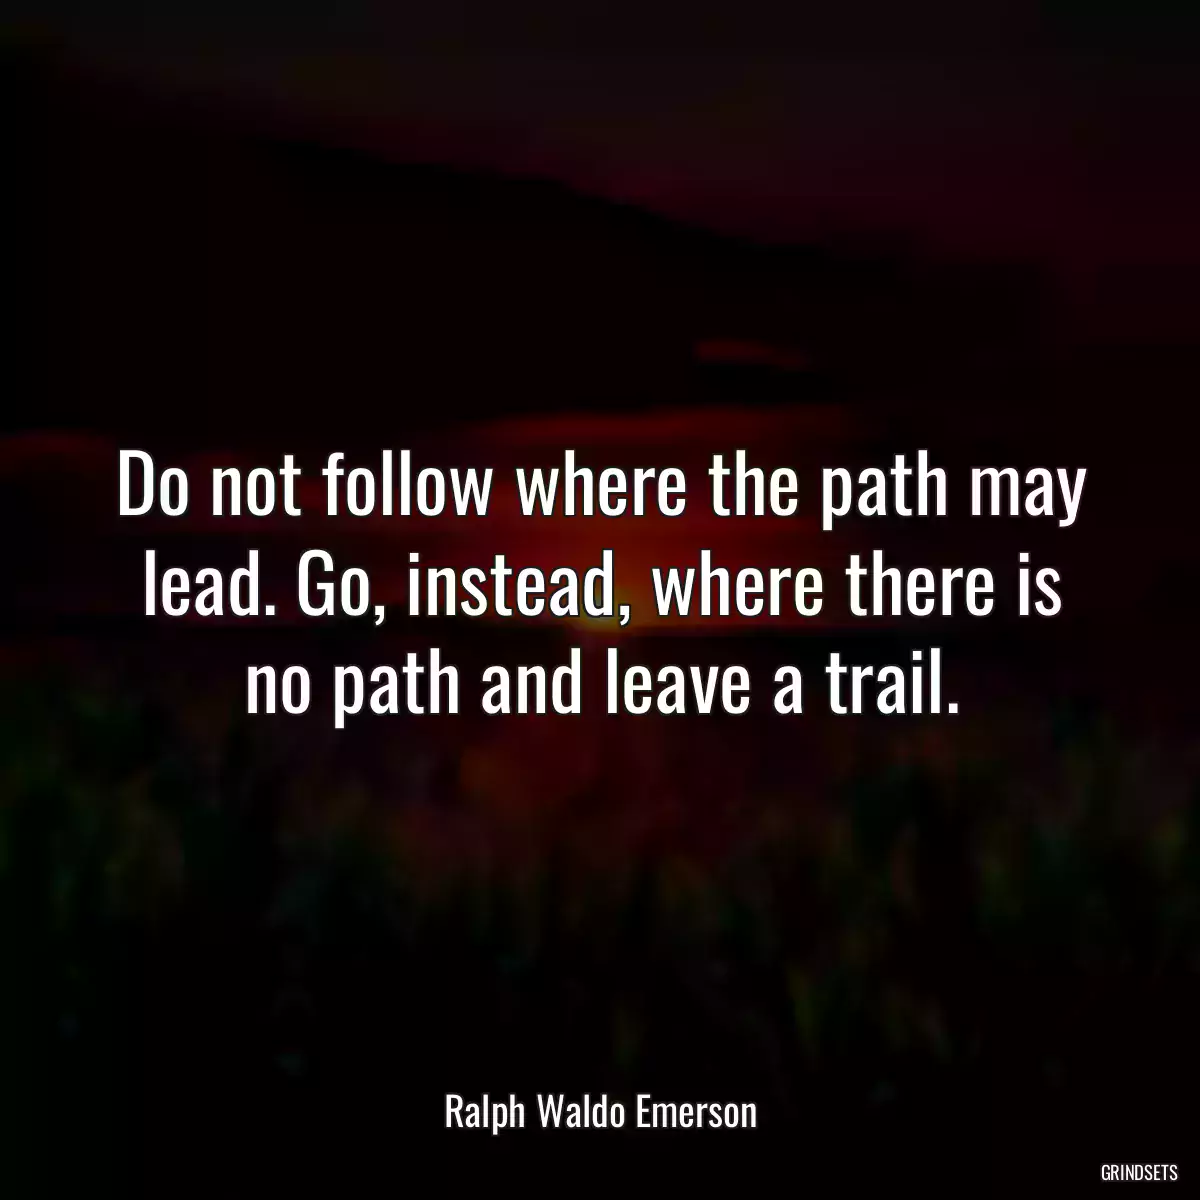 Do not follow where the path may lead. Go, instead, where there is no path and leave a trail.